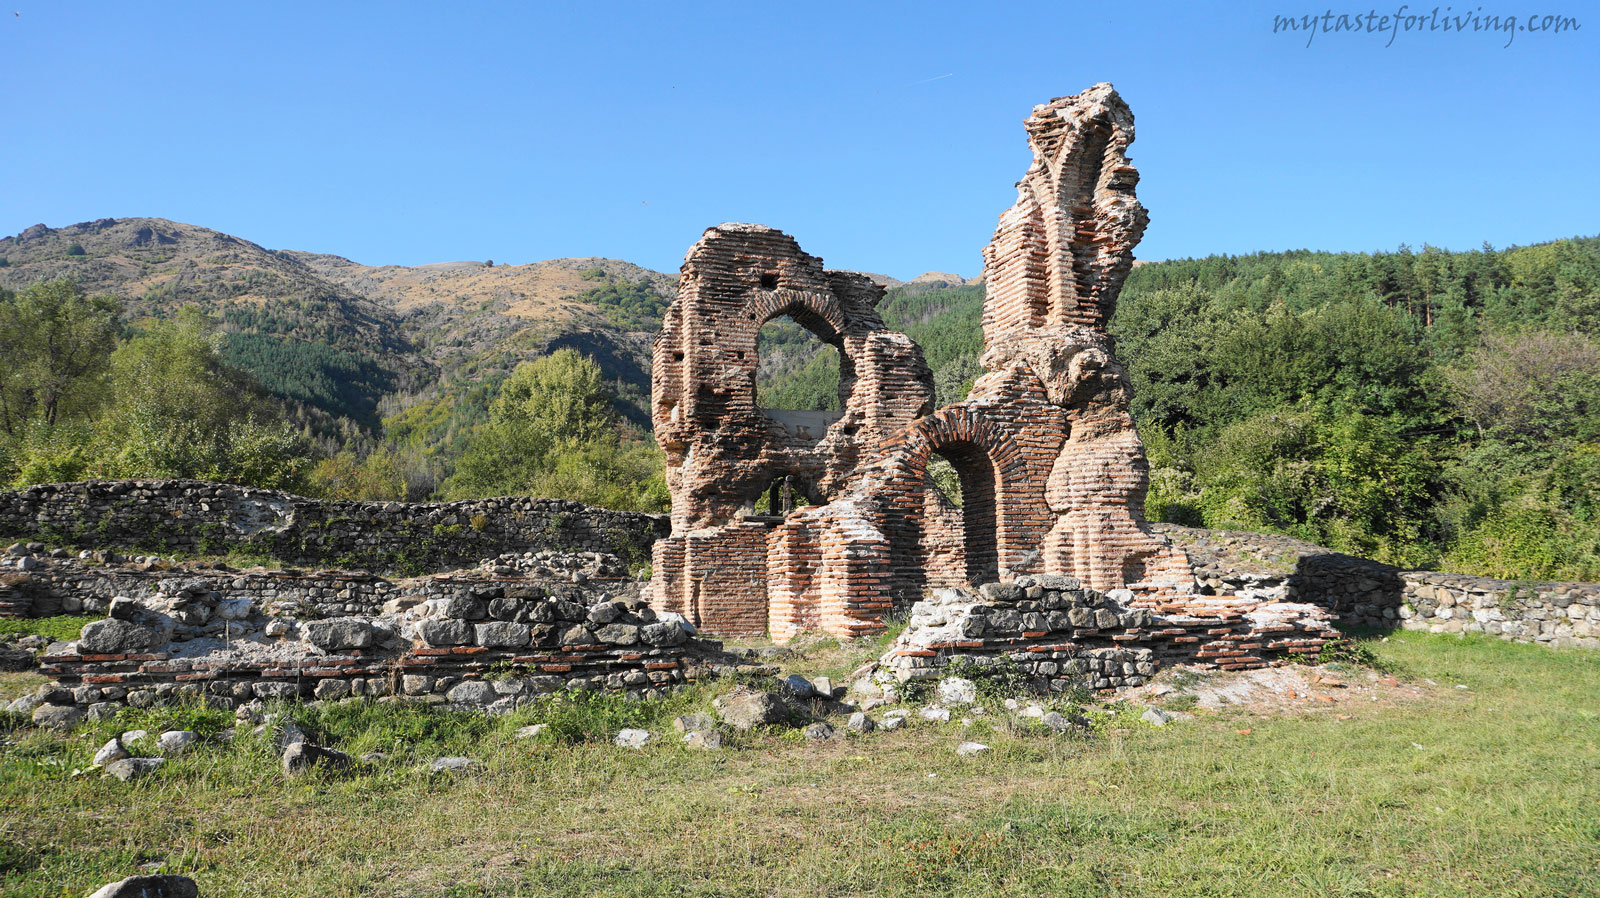 The Elenska Basilica is located between the town of Pirdop and the village of Anton, at the foot of the southern slopes of of Stara planina (Balkan mountains), Bulgaria. The place is very peaceful, very pleasant for a walk in the nature and suitable for picnics.